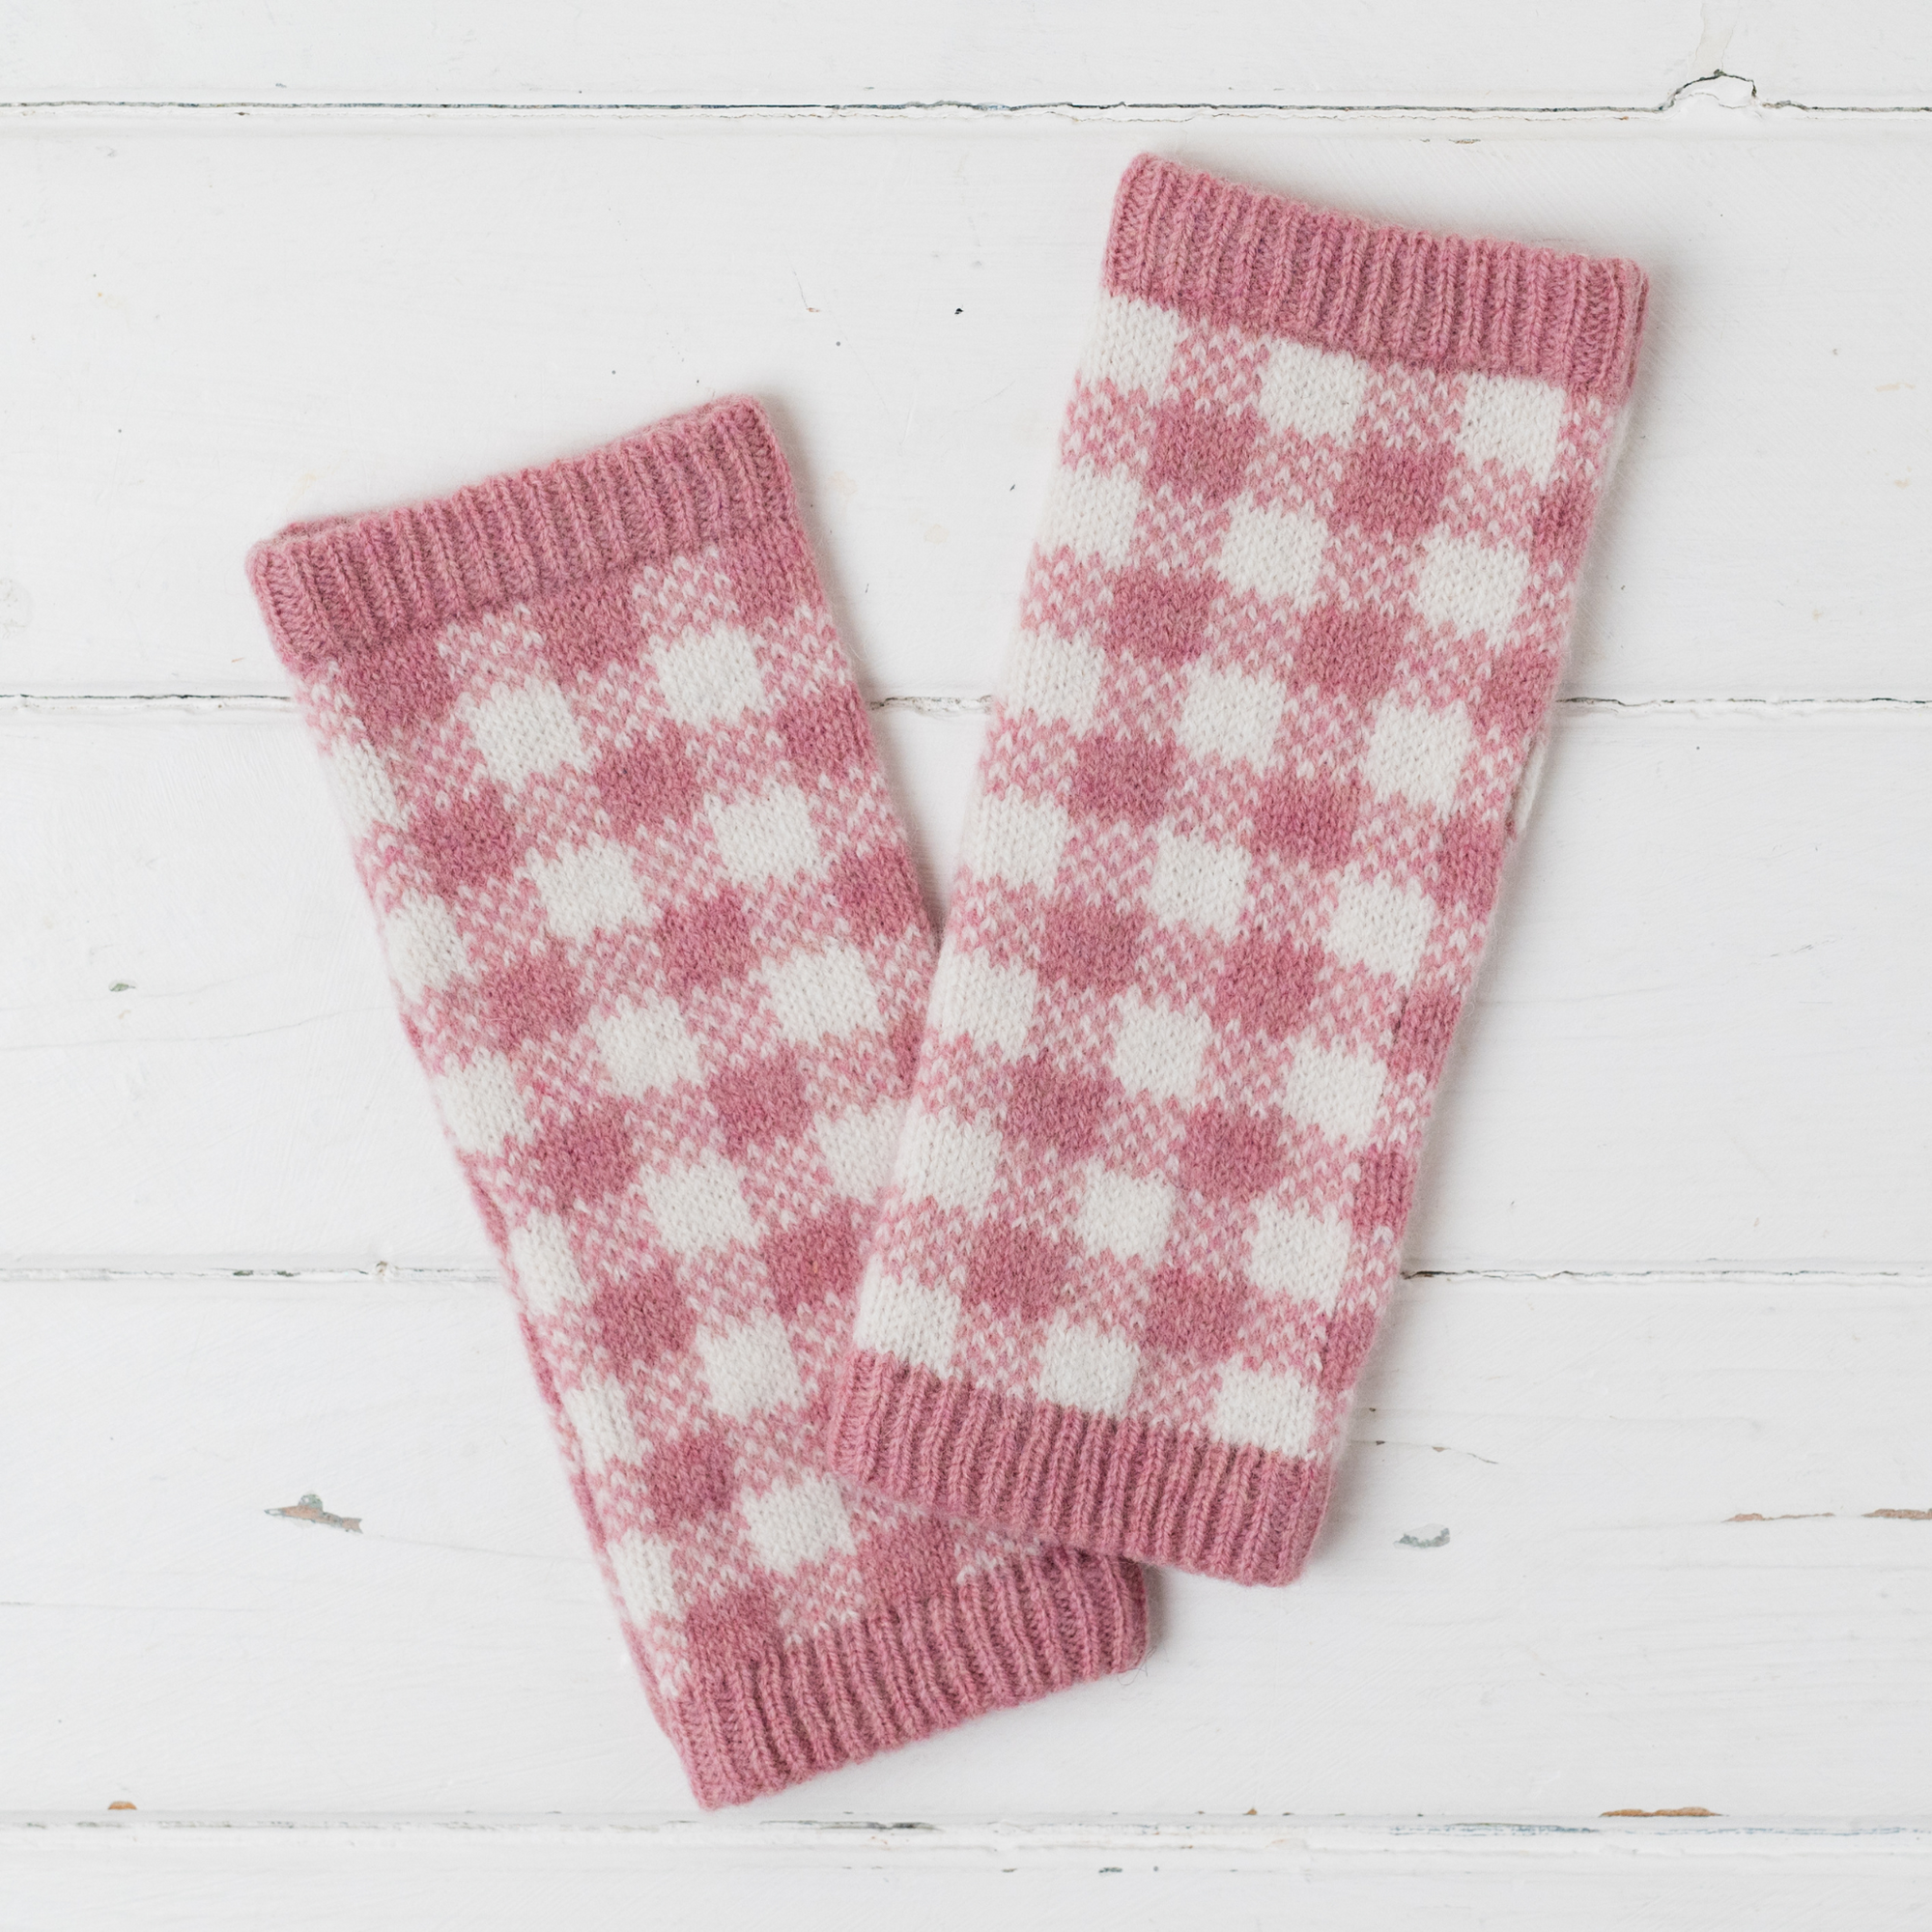 Gingham wrist warmers - pink and white (MADE TO ORDER)